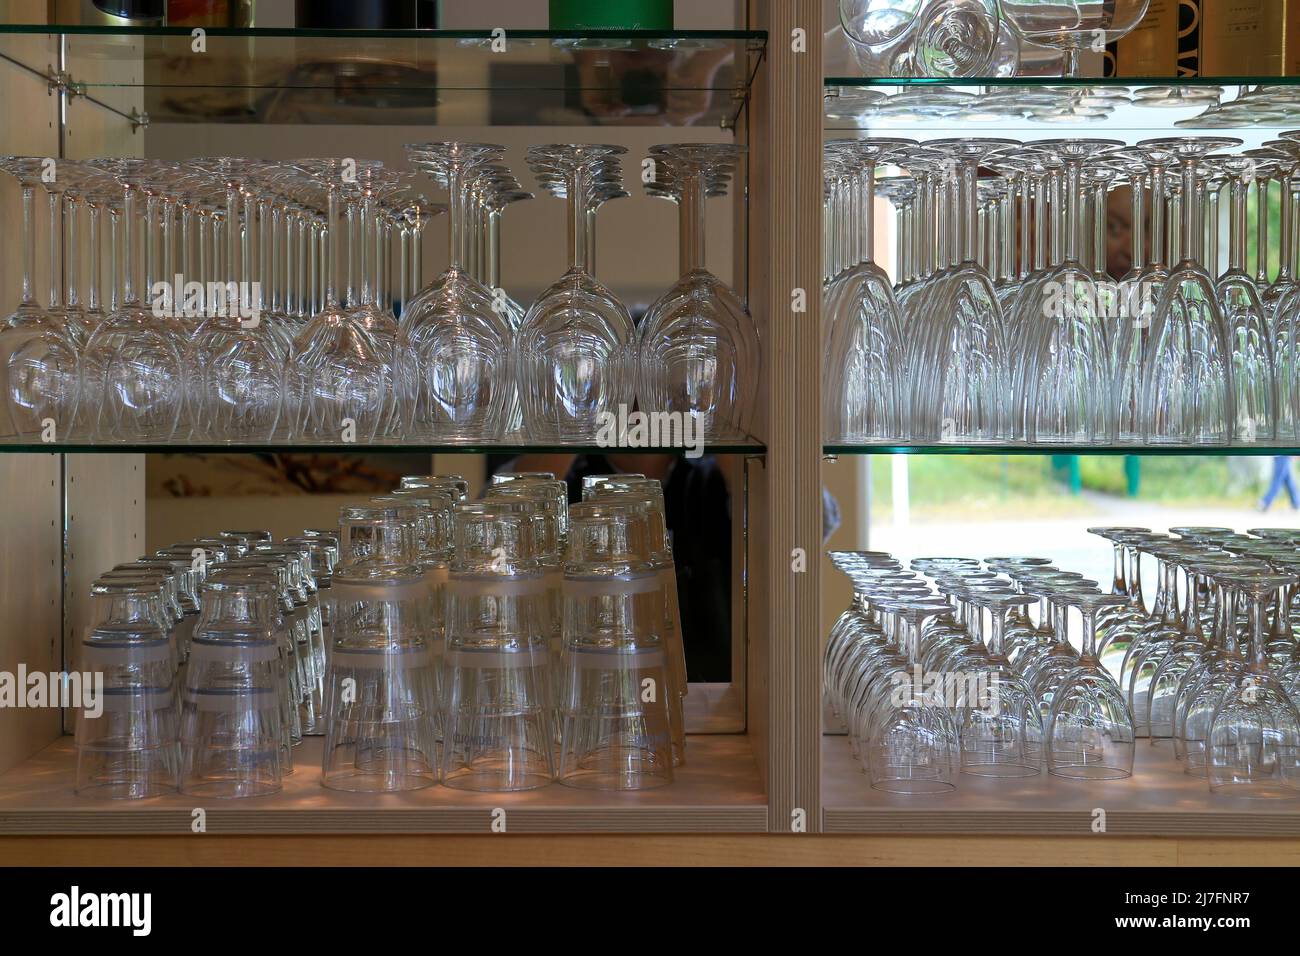 Many shiny glasses in rows on shelves inside a bar Stock Photo